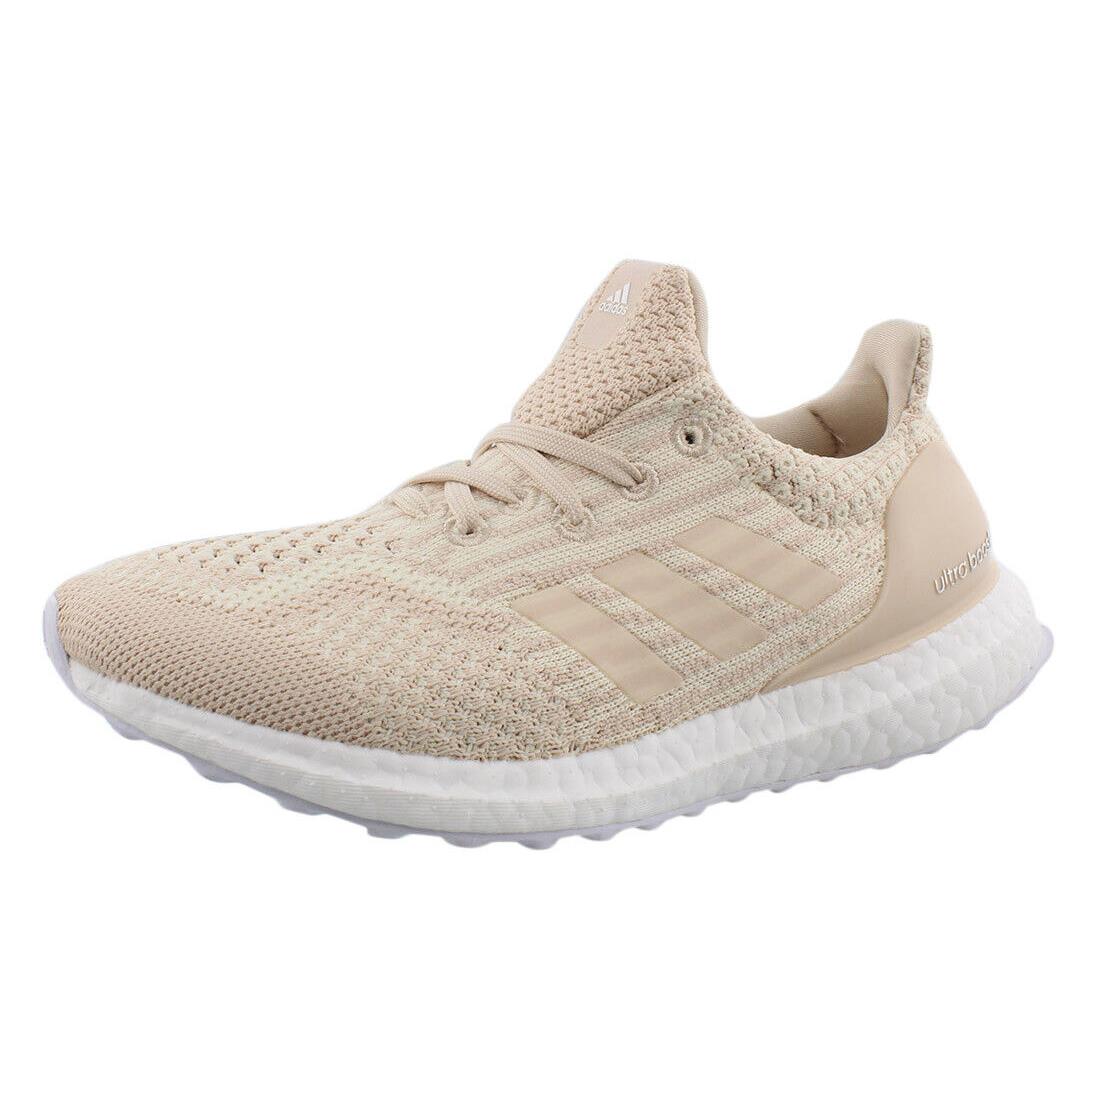 Adidas Ultraboost 5.0 Unca Womens Shoes - Pink/Beige/White, Main: Pink